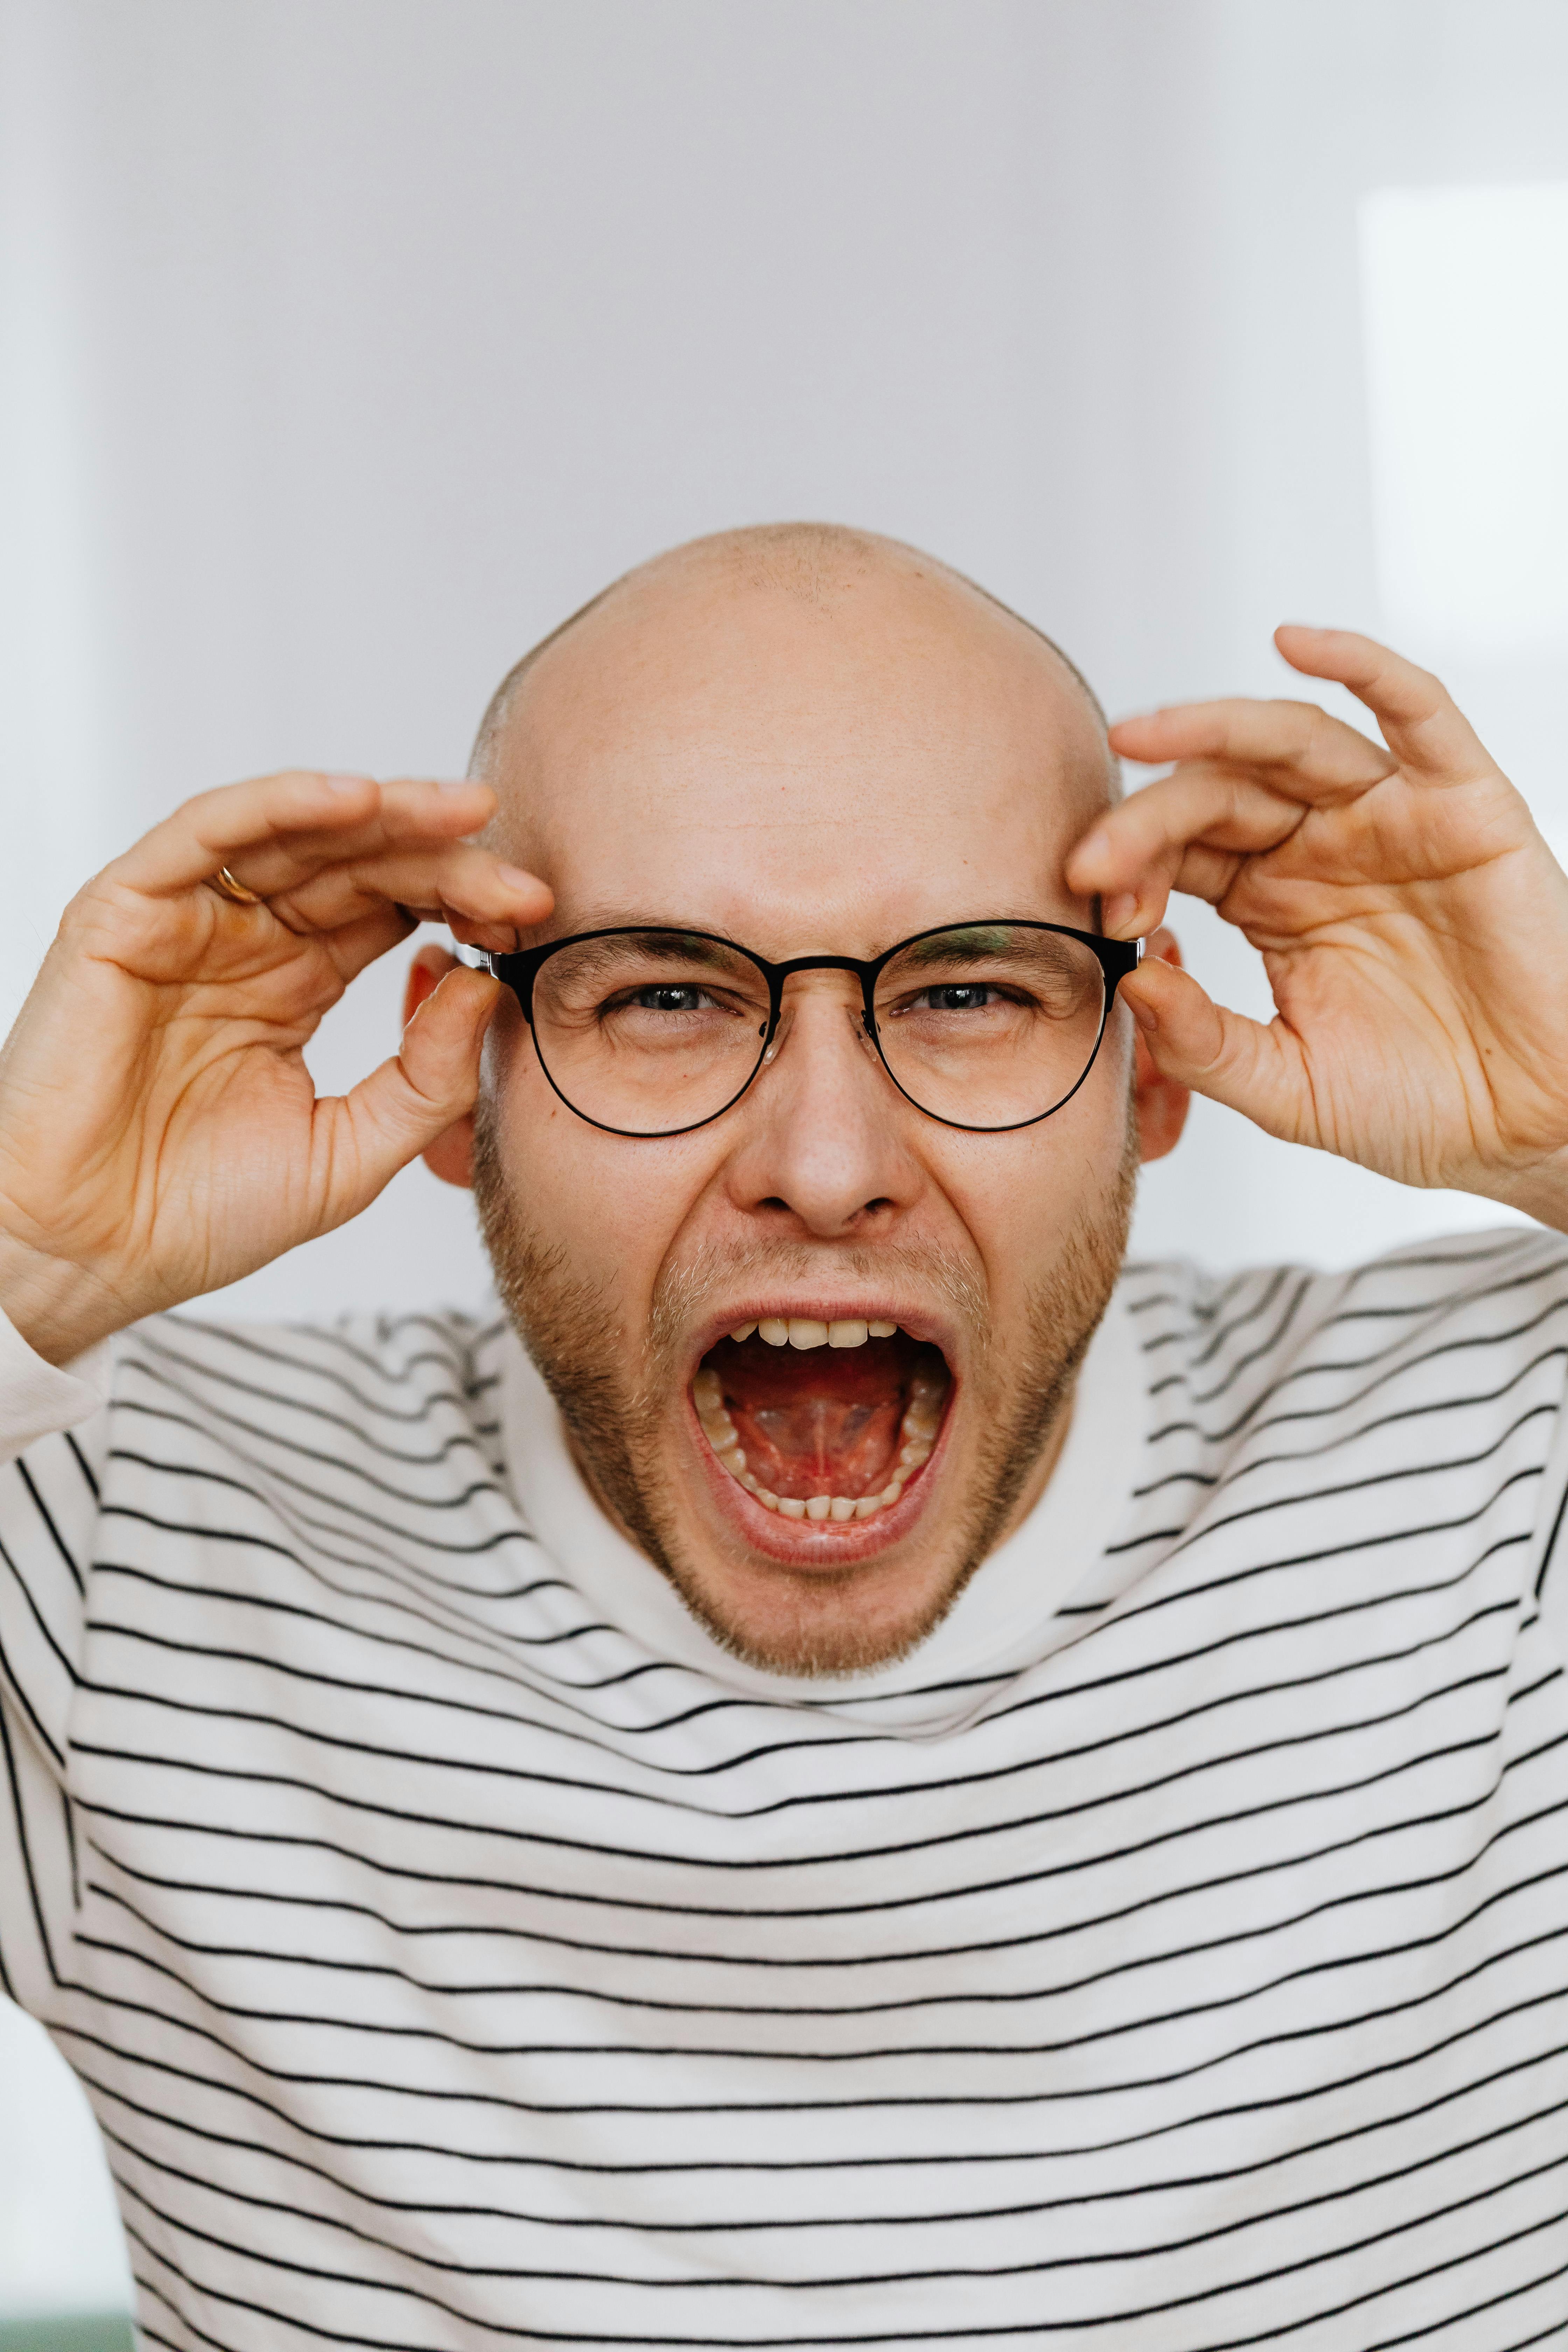 An angry man yelling | Source: Pexels